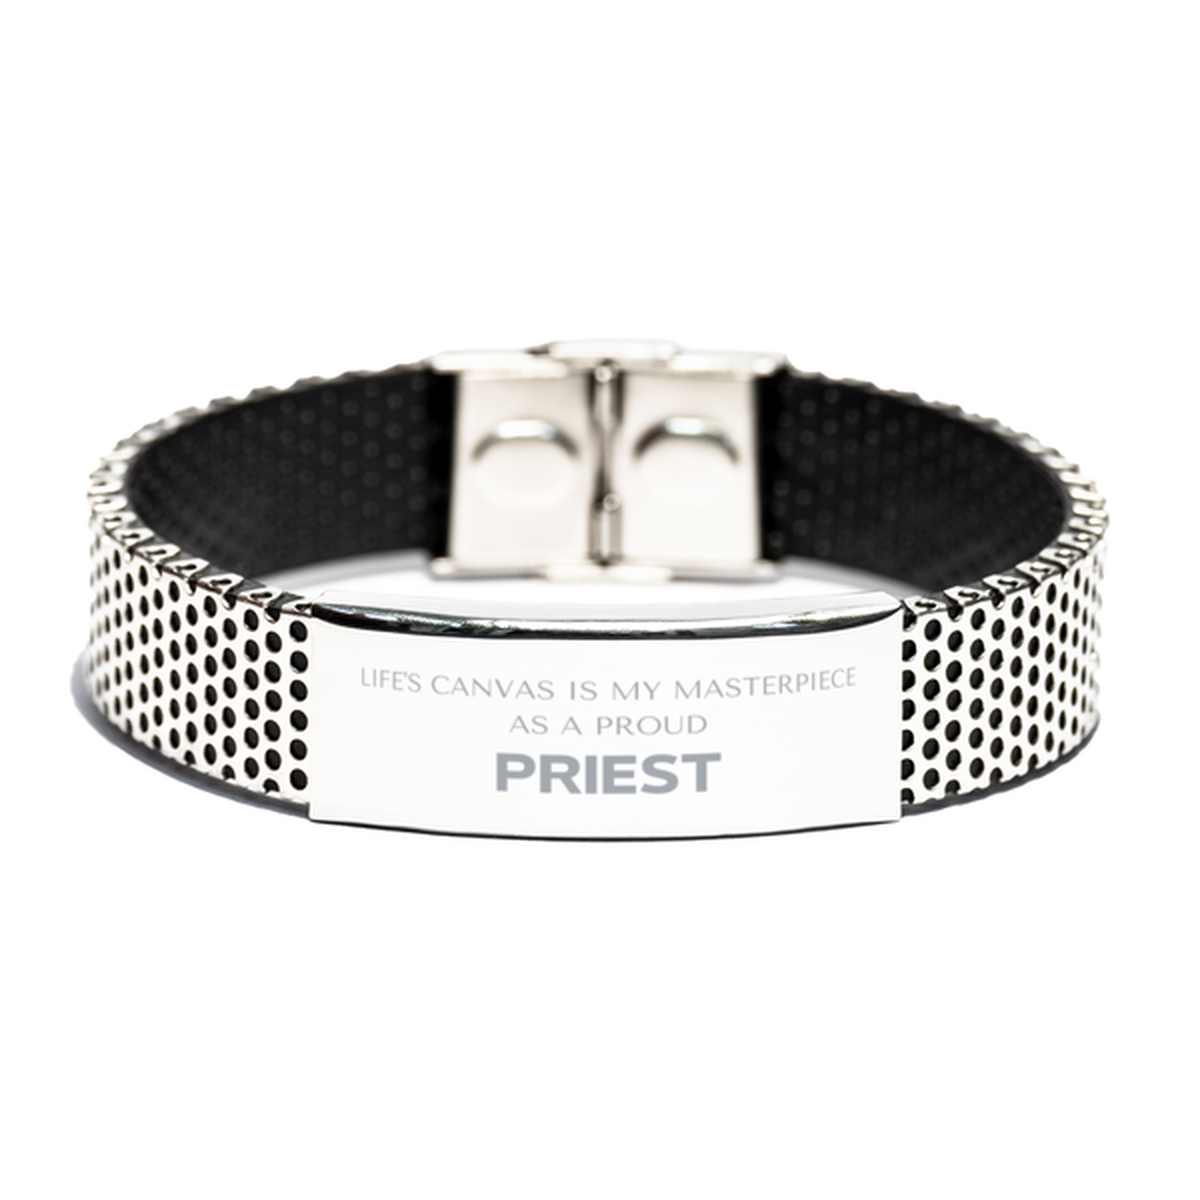 Proud Priest Gifts, Life's canvas is my masterpiece, Epic Birthday Christmas Unique Stainless Steel Bracelet For Priest, Coworkers, Men, Women, Friends